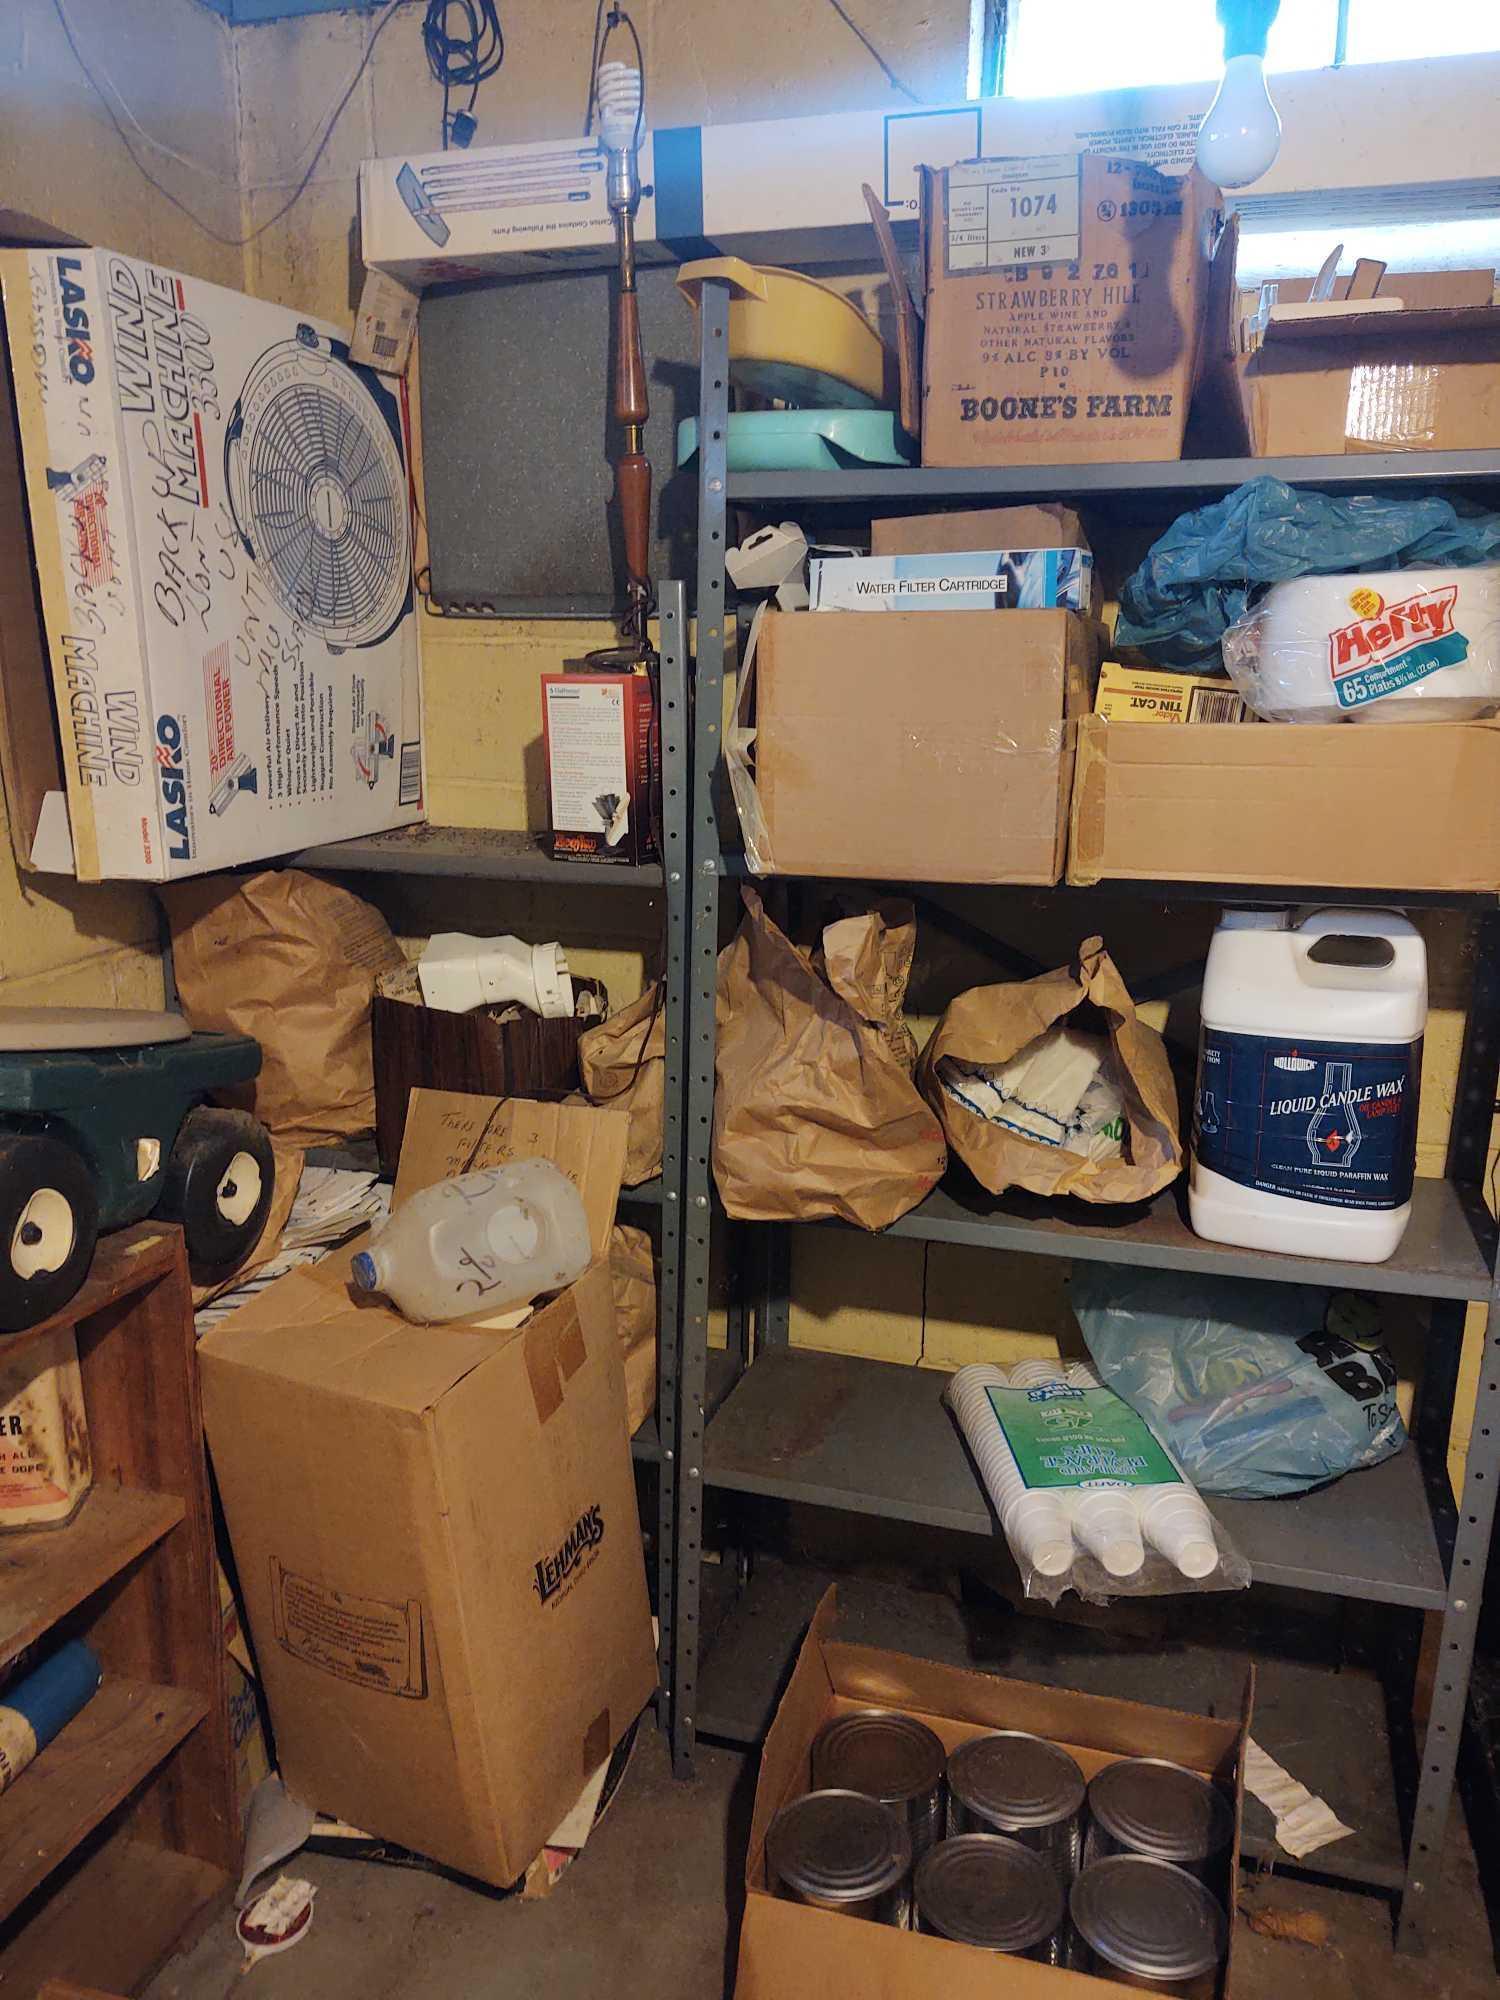 Contents of metal shelves: assorted paints, sprays, extension cords, styrofoam cups and plates